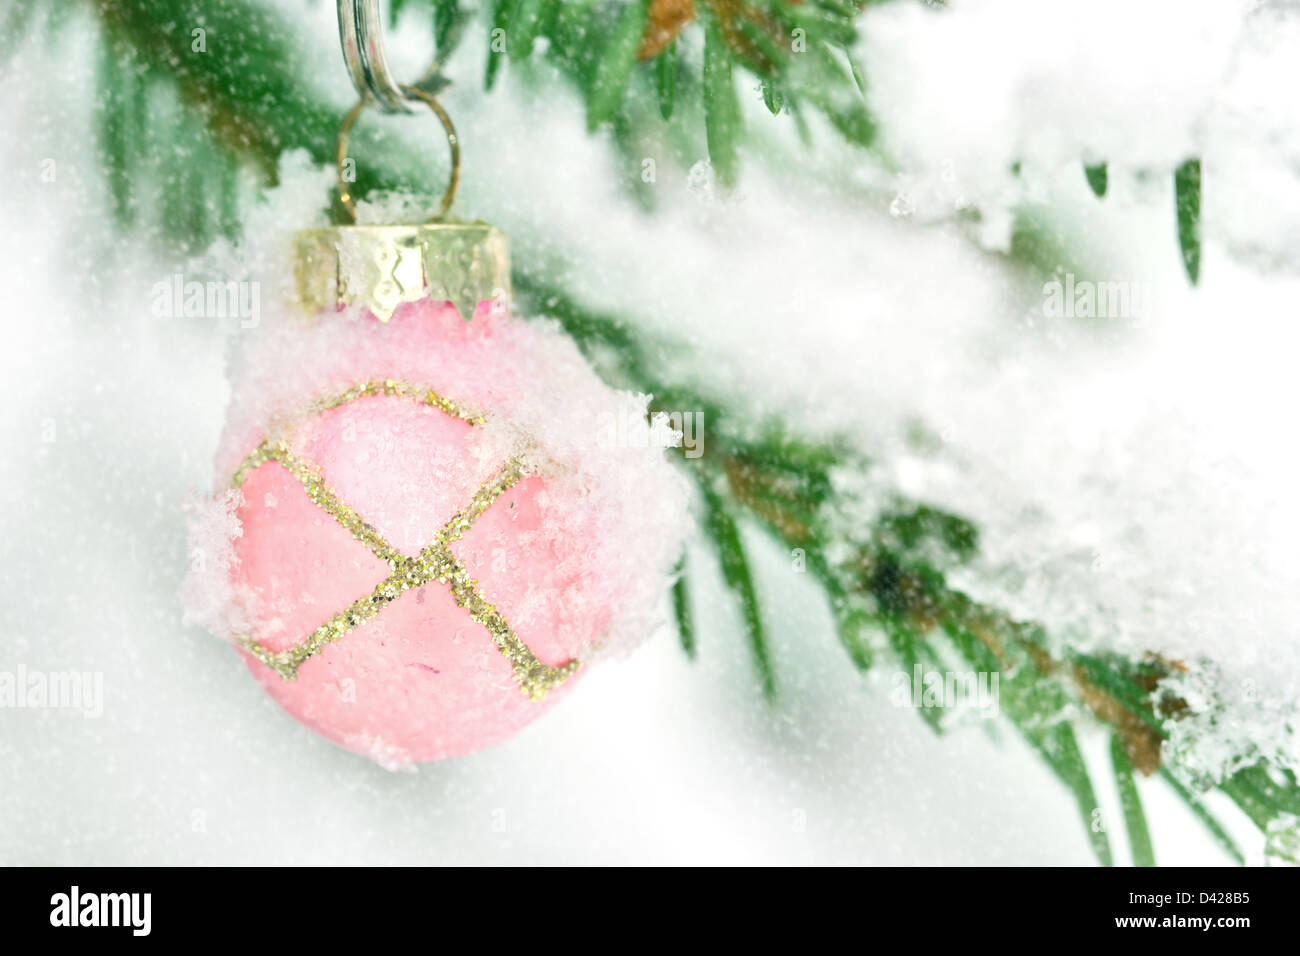 Pink Christmas bauble hanging outdoors in a snowy Xmas tree Stock Photo